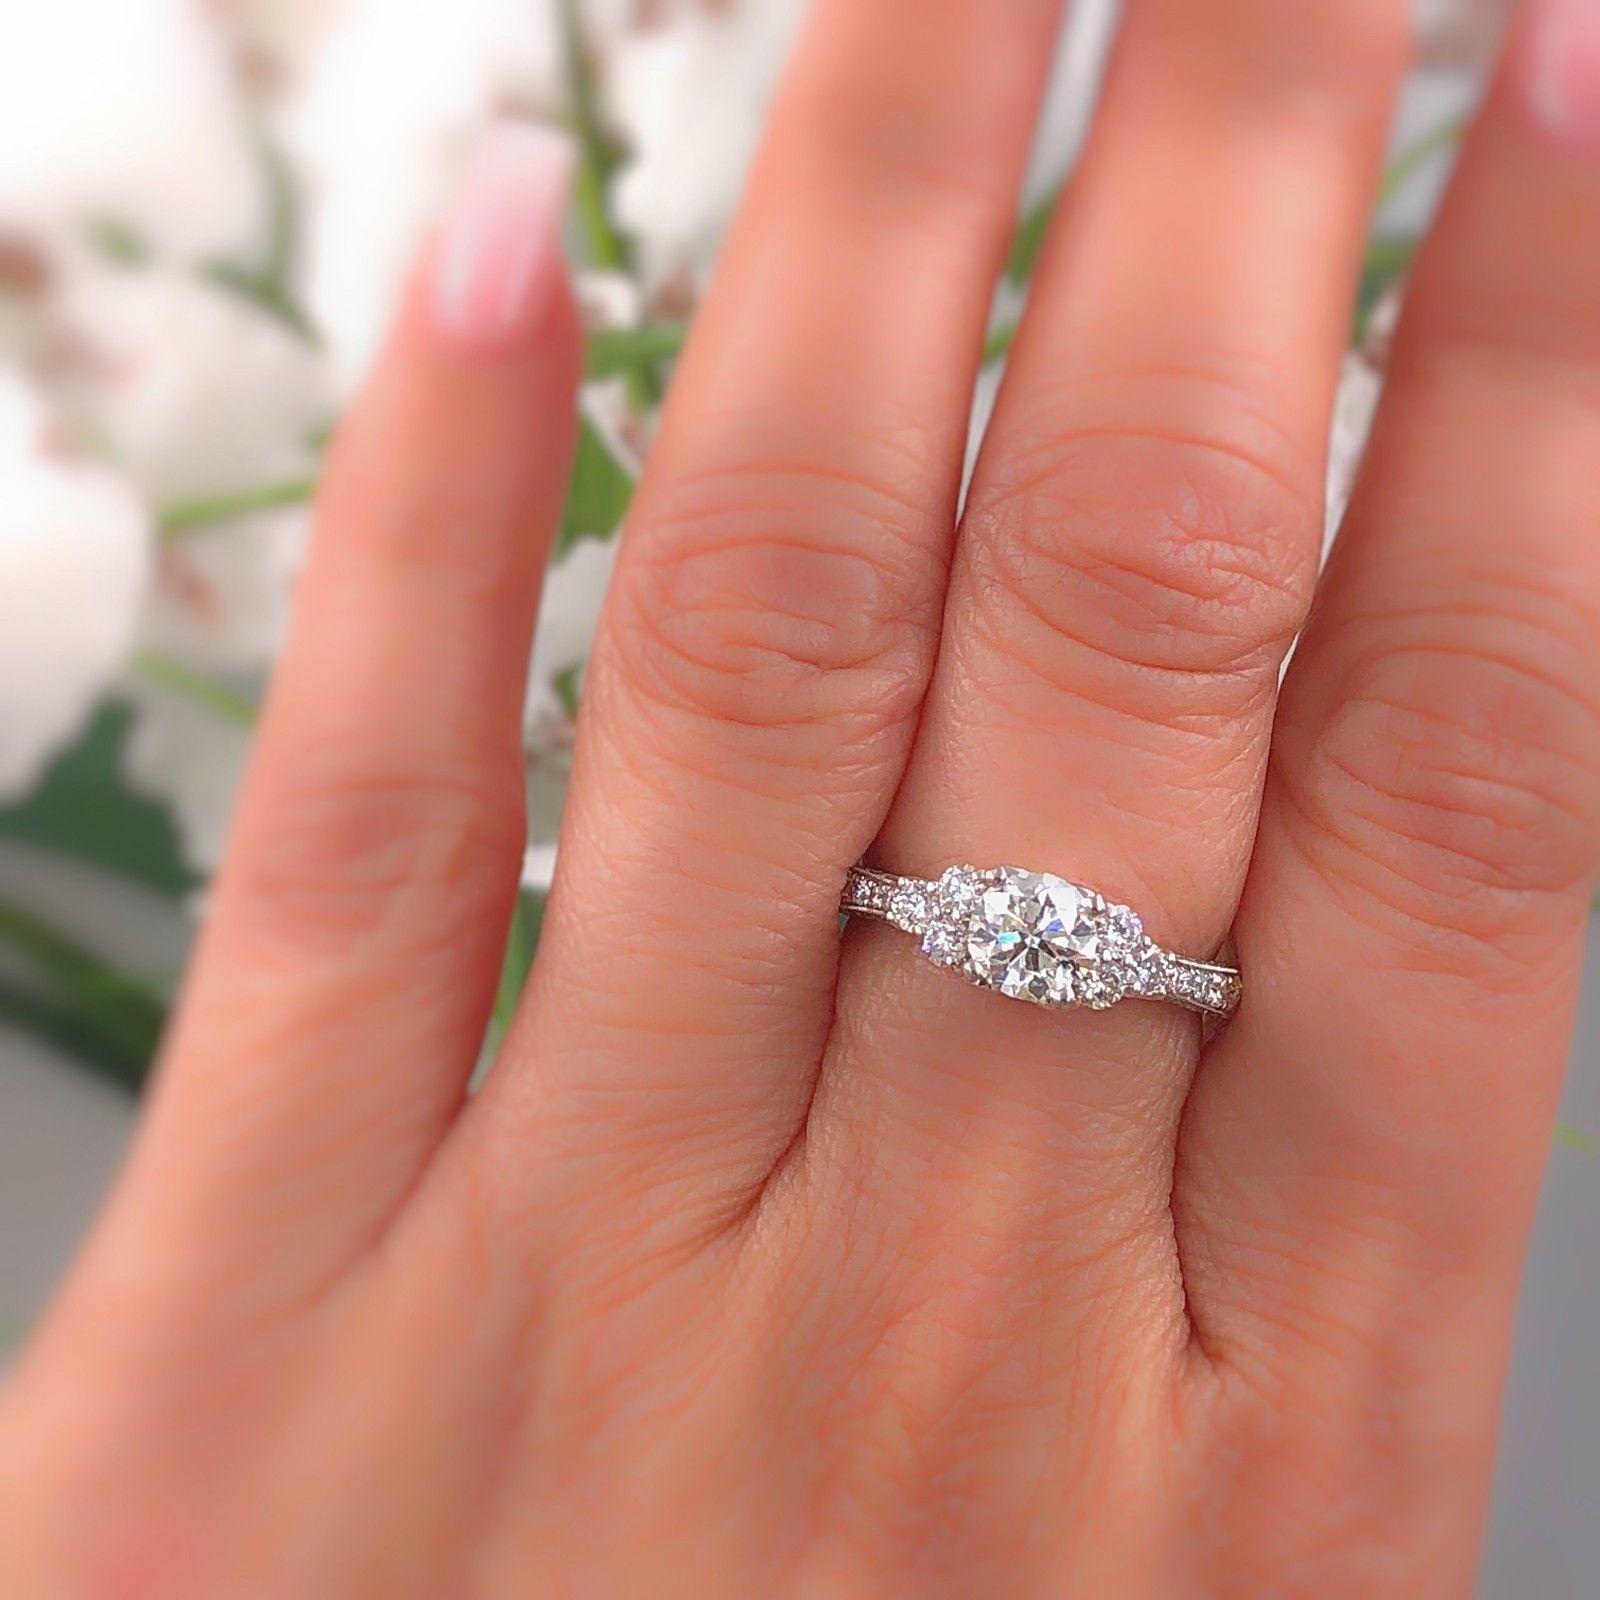 NEIL LANE BRIDAL
Style:  Solitaire with Diamond Accents
Metal:  14k White Gold
Size:  6 - sizable
Total Carat Weight:  1.35 tcw
Diamond Shape:  Round Diamond 0.75 cts I color, I1 clarity
Accent Diamonds Color & Clarity:  6 Round Diamonds 0.30 tcw,